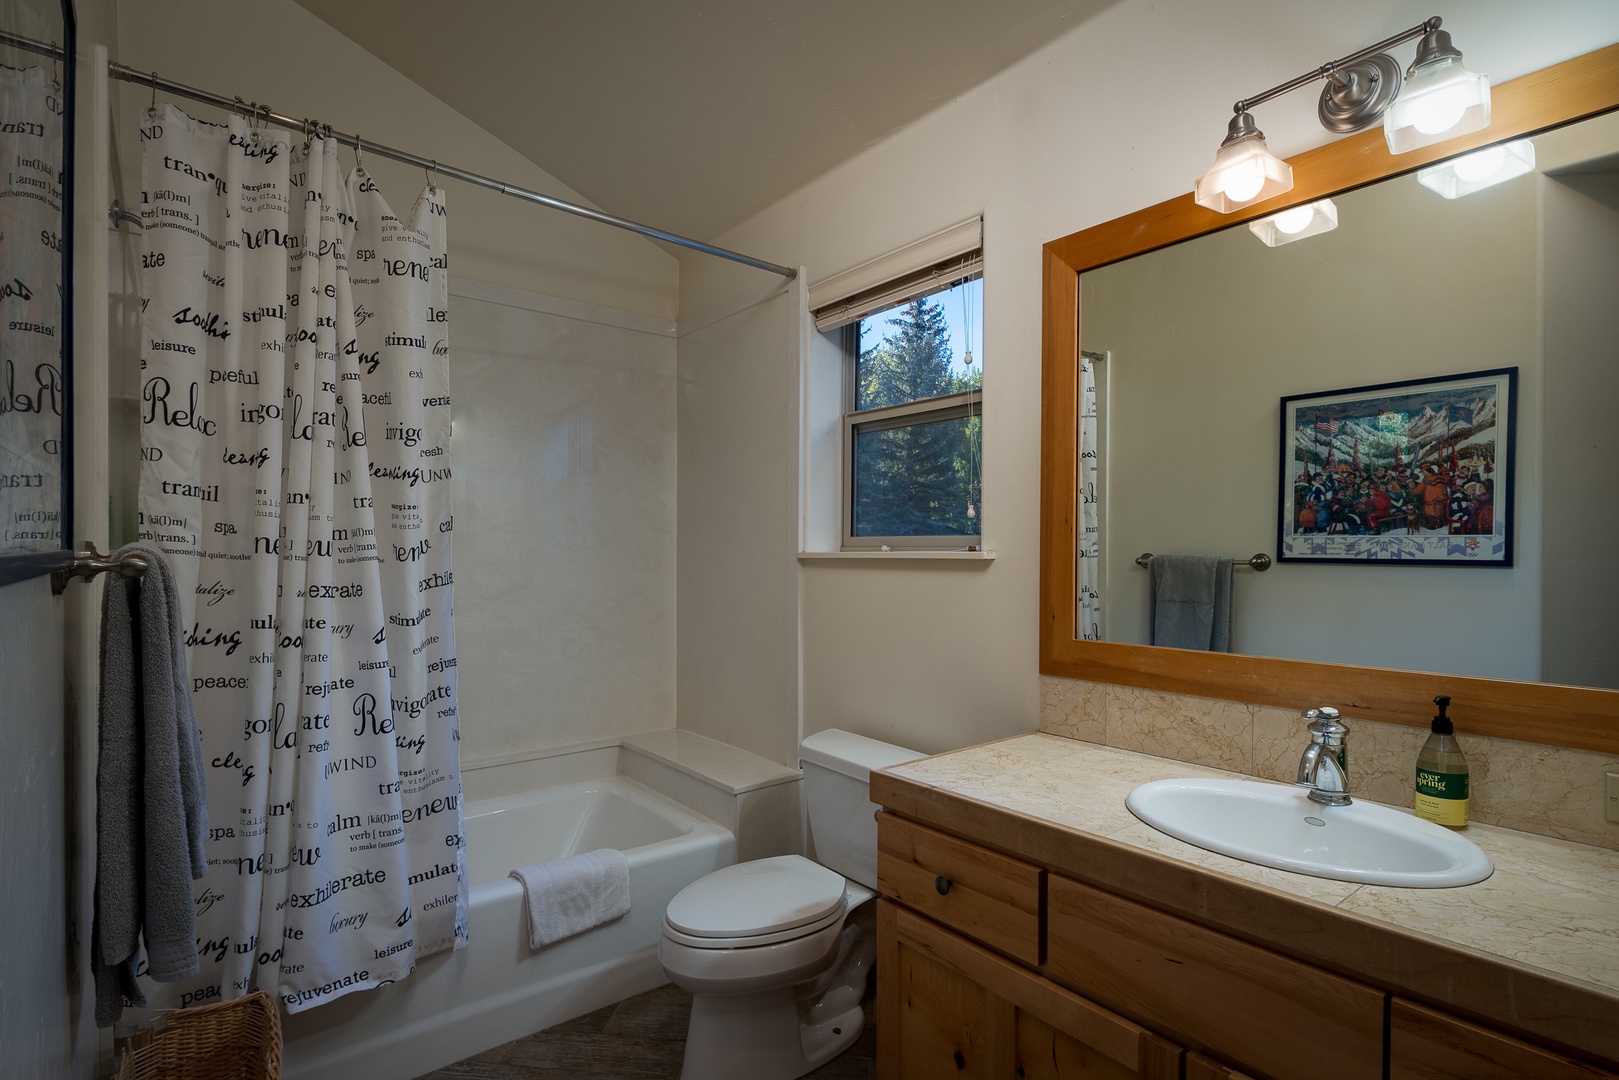 Ketchum Vacation Rentals, Bridgepoint Charm - Guest Bathroom 1 with shower/tub combo